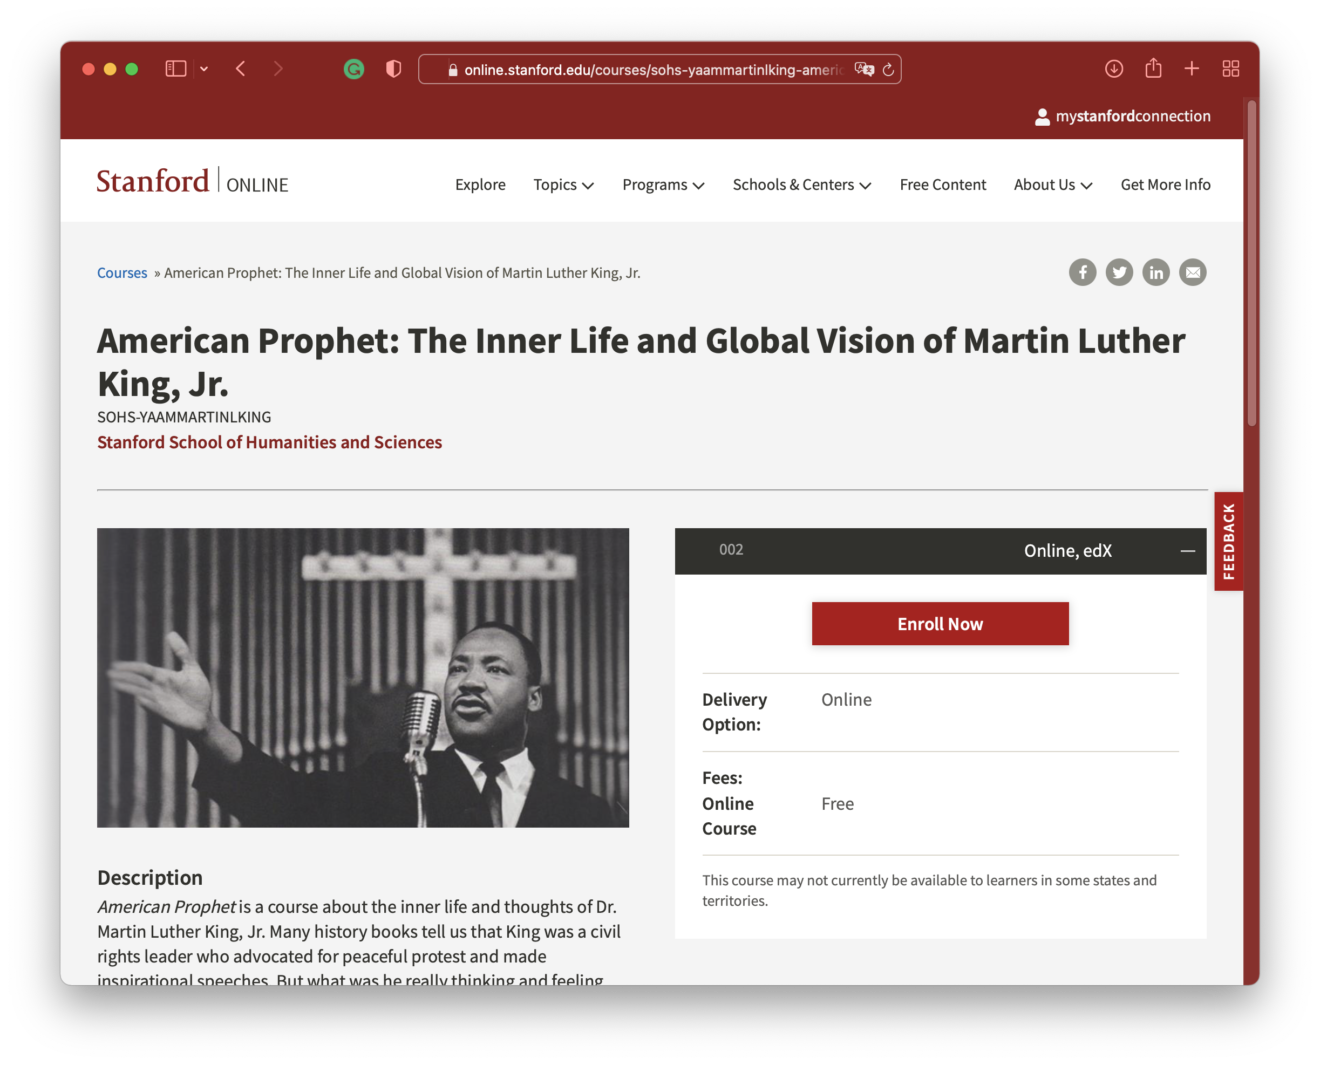 American Prophet: The Inner Life and Global Vision of Martin Luther King, Jr.